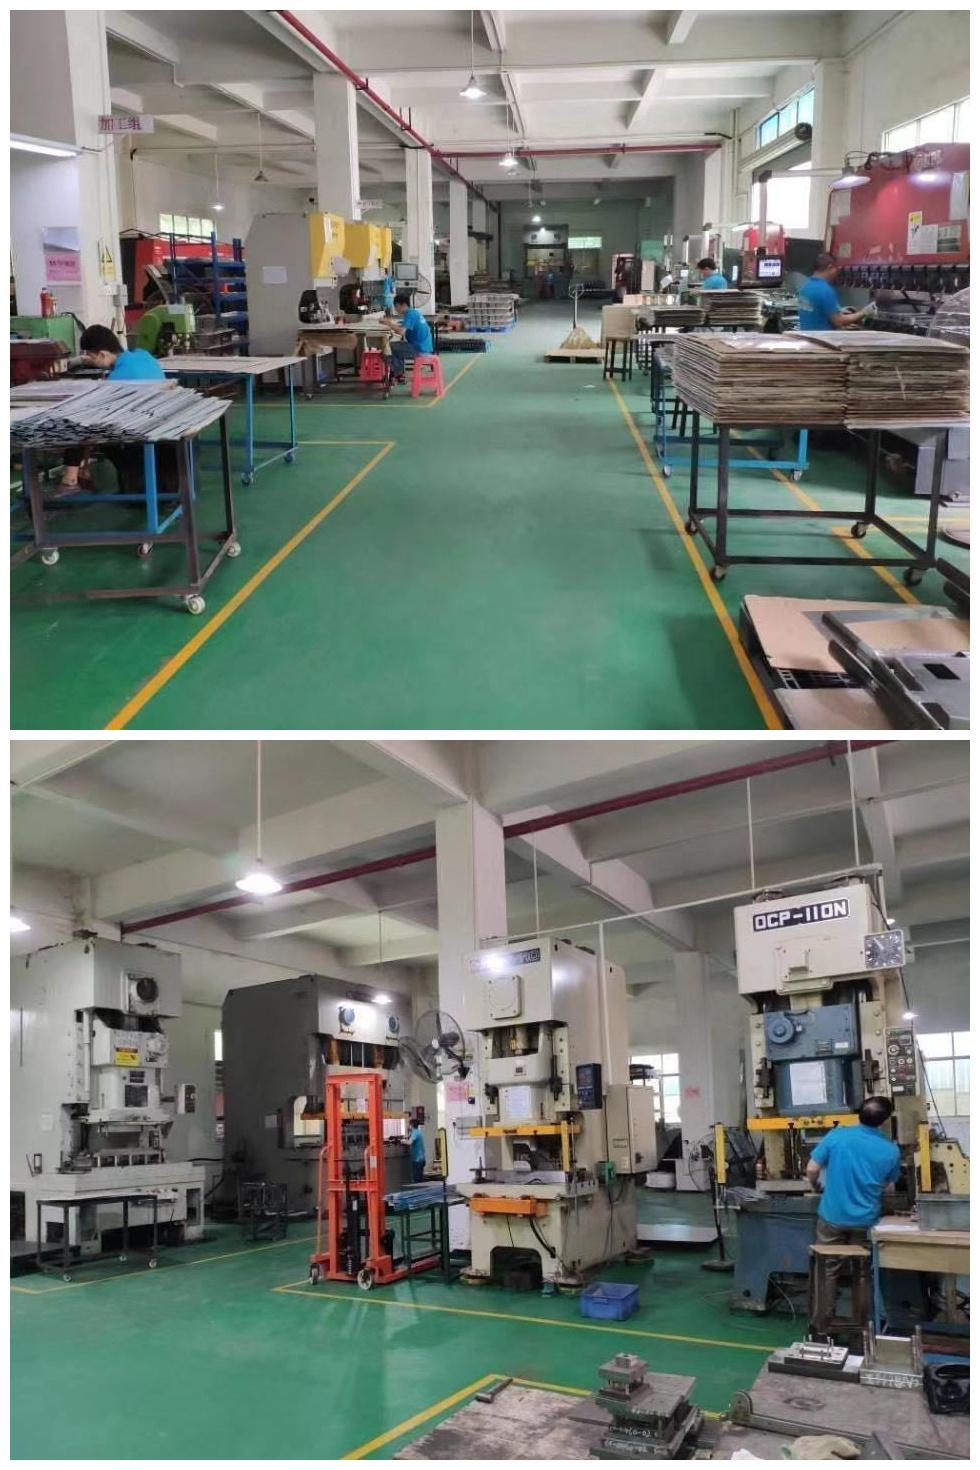 Contact Supplierleave Stamping Processing Aluminum Metal Parts